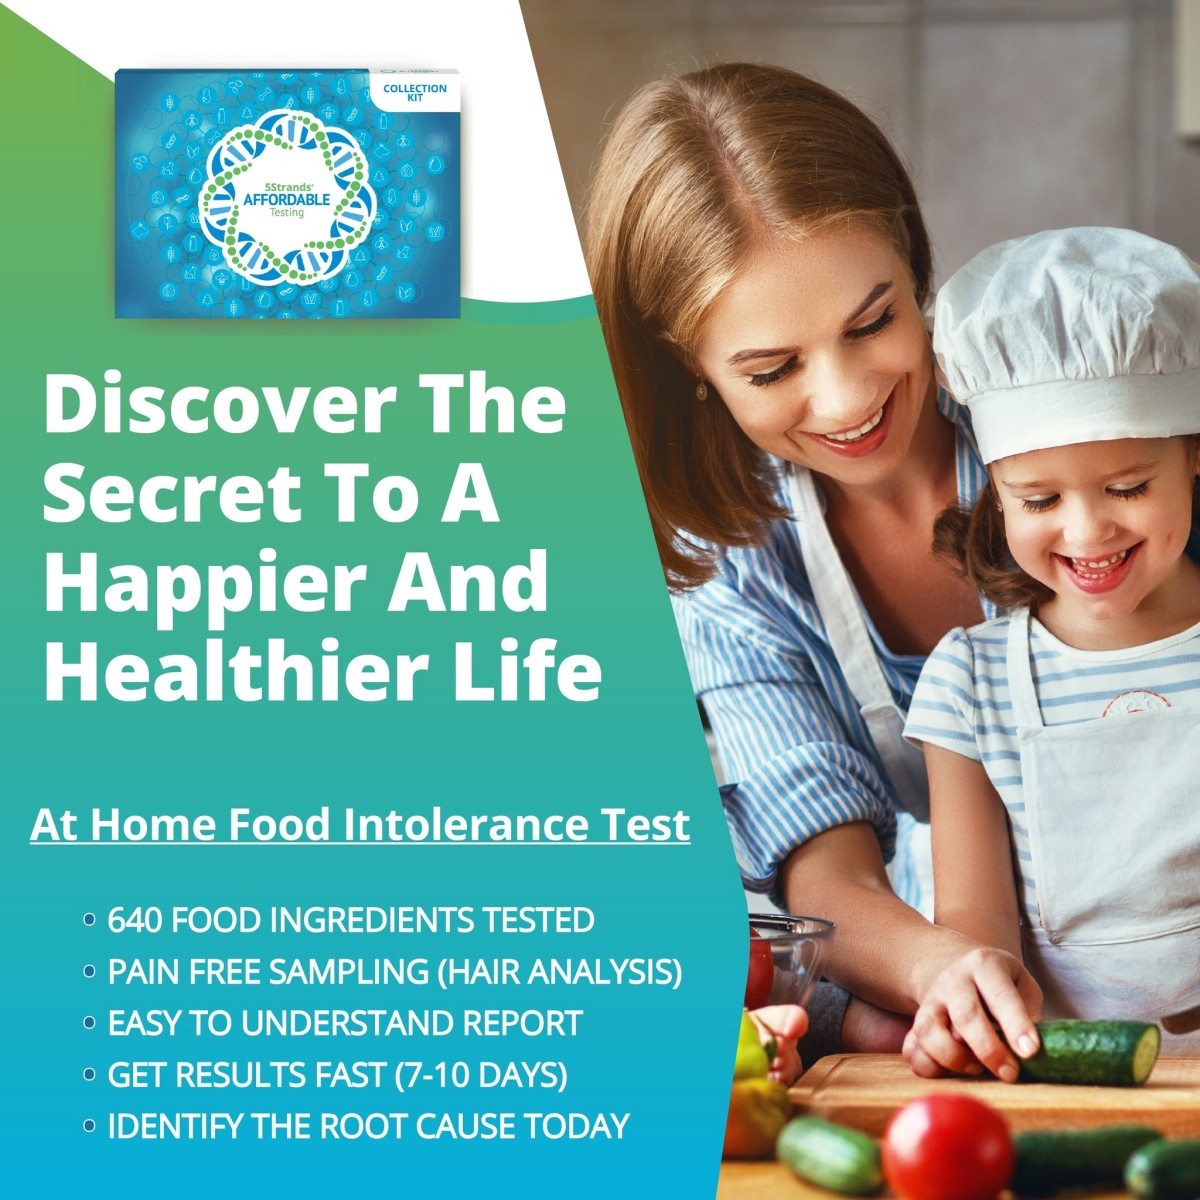 At-Home Food Intolerance Test with Free Results Consultation